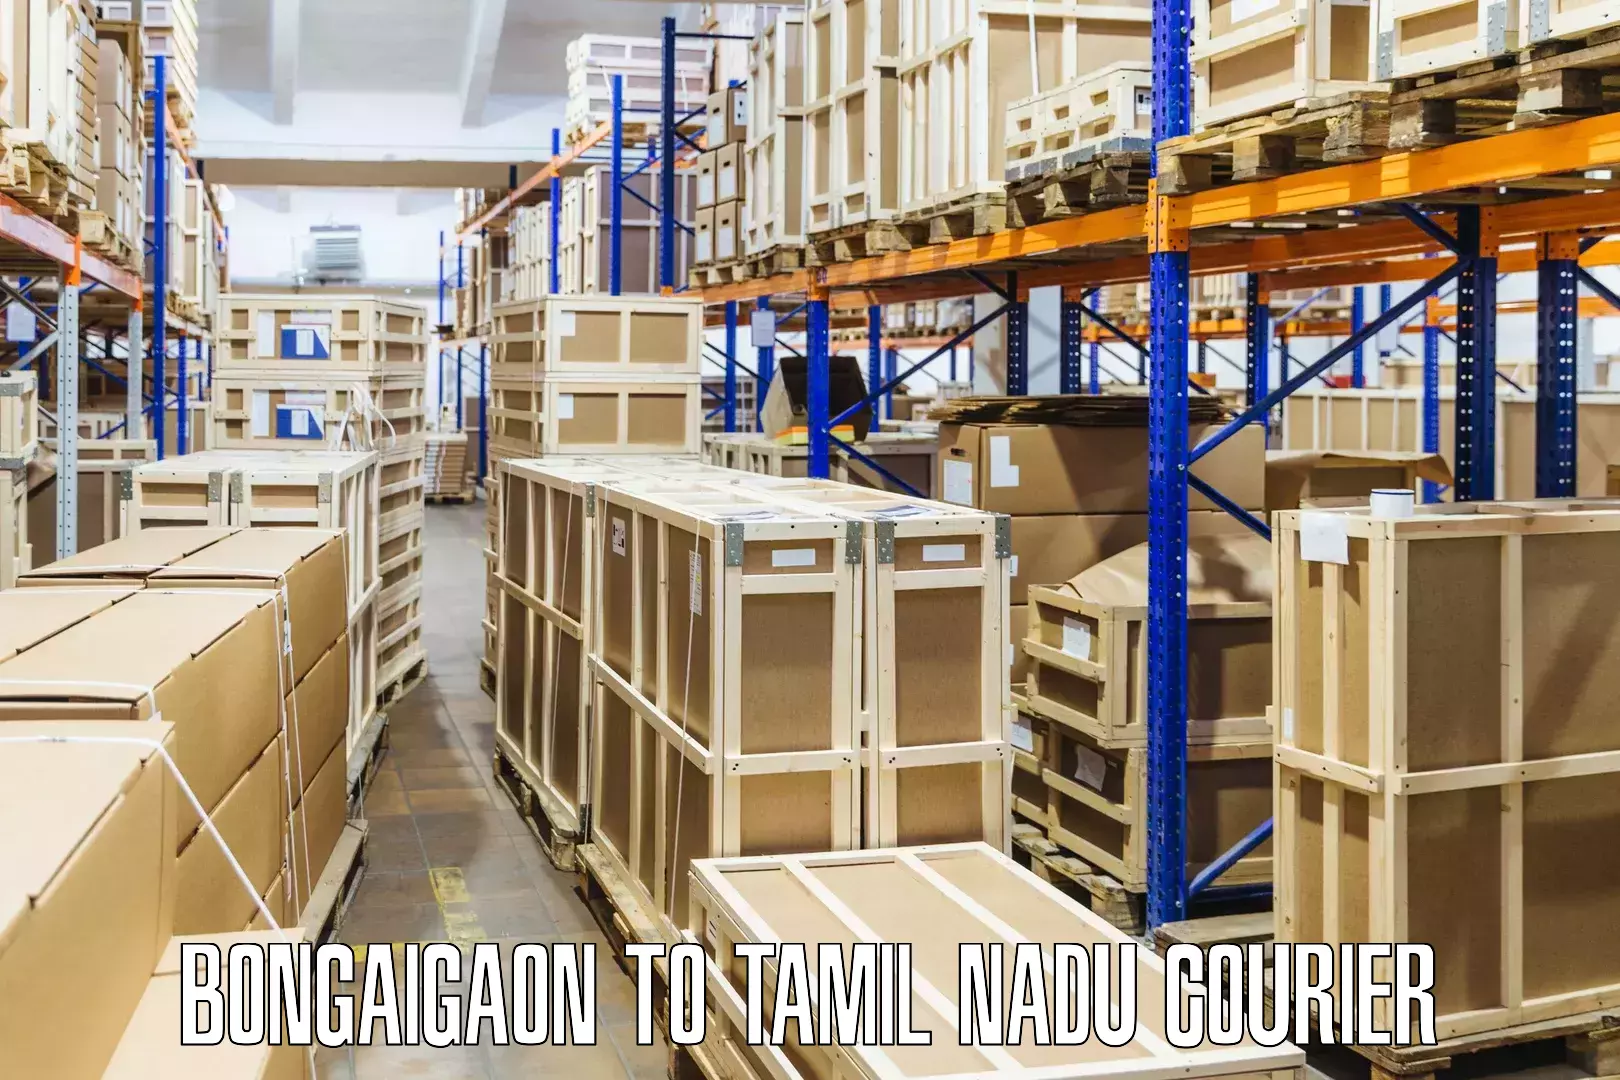 Multi-service courier options Bongaigaon to Tamil Nadu